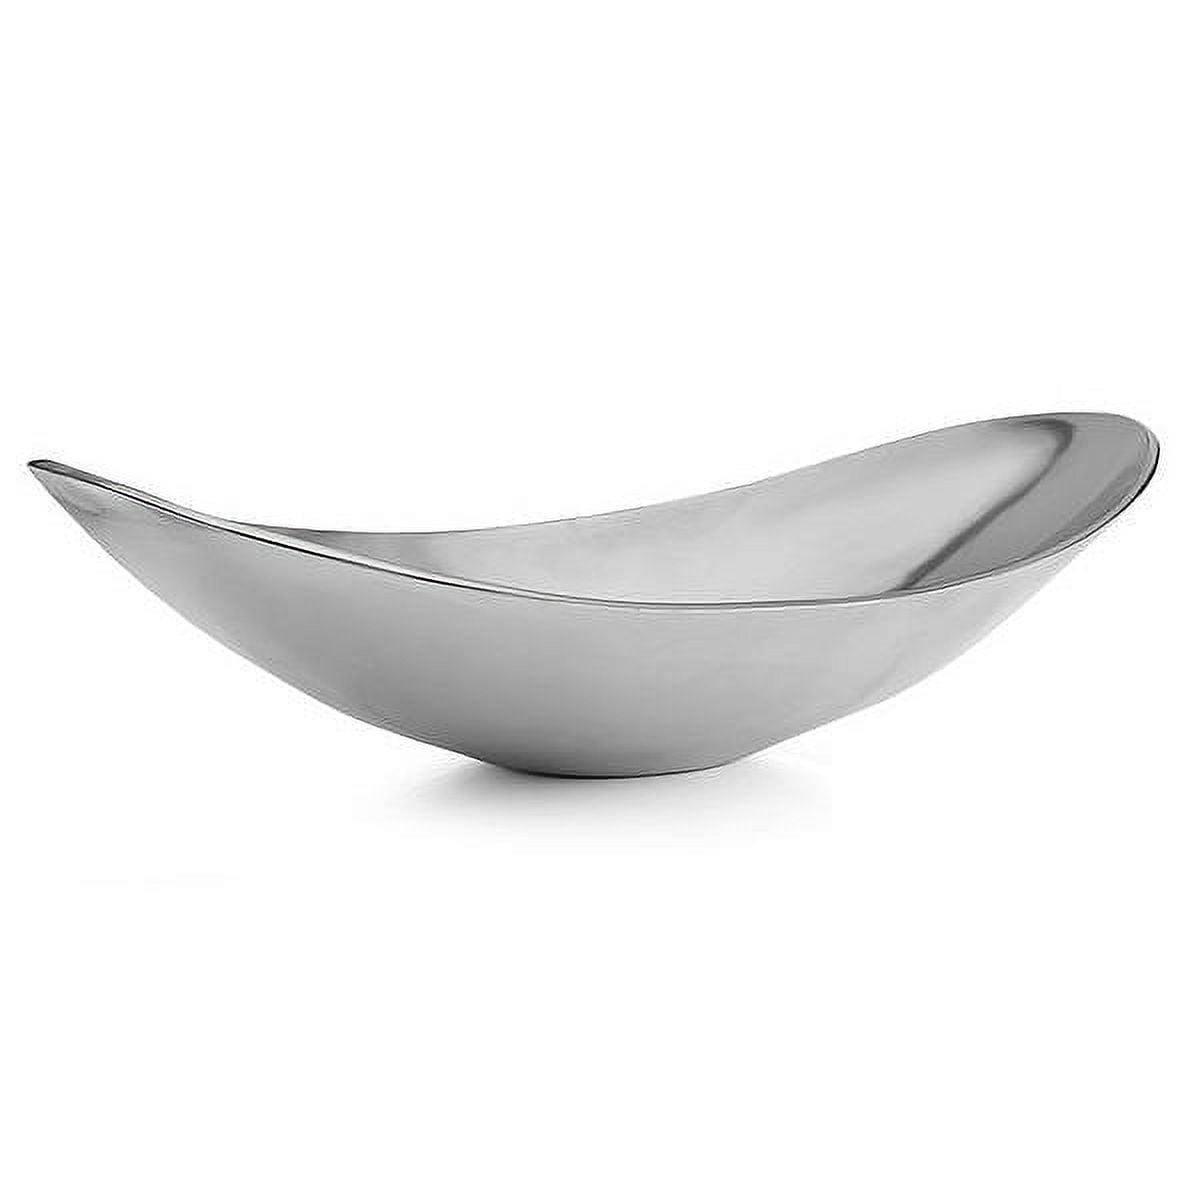 Grande Clear Glass Salad and Pasta Serving Bowl